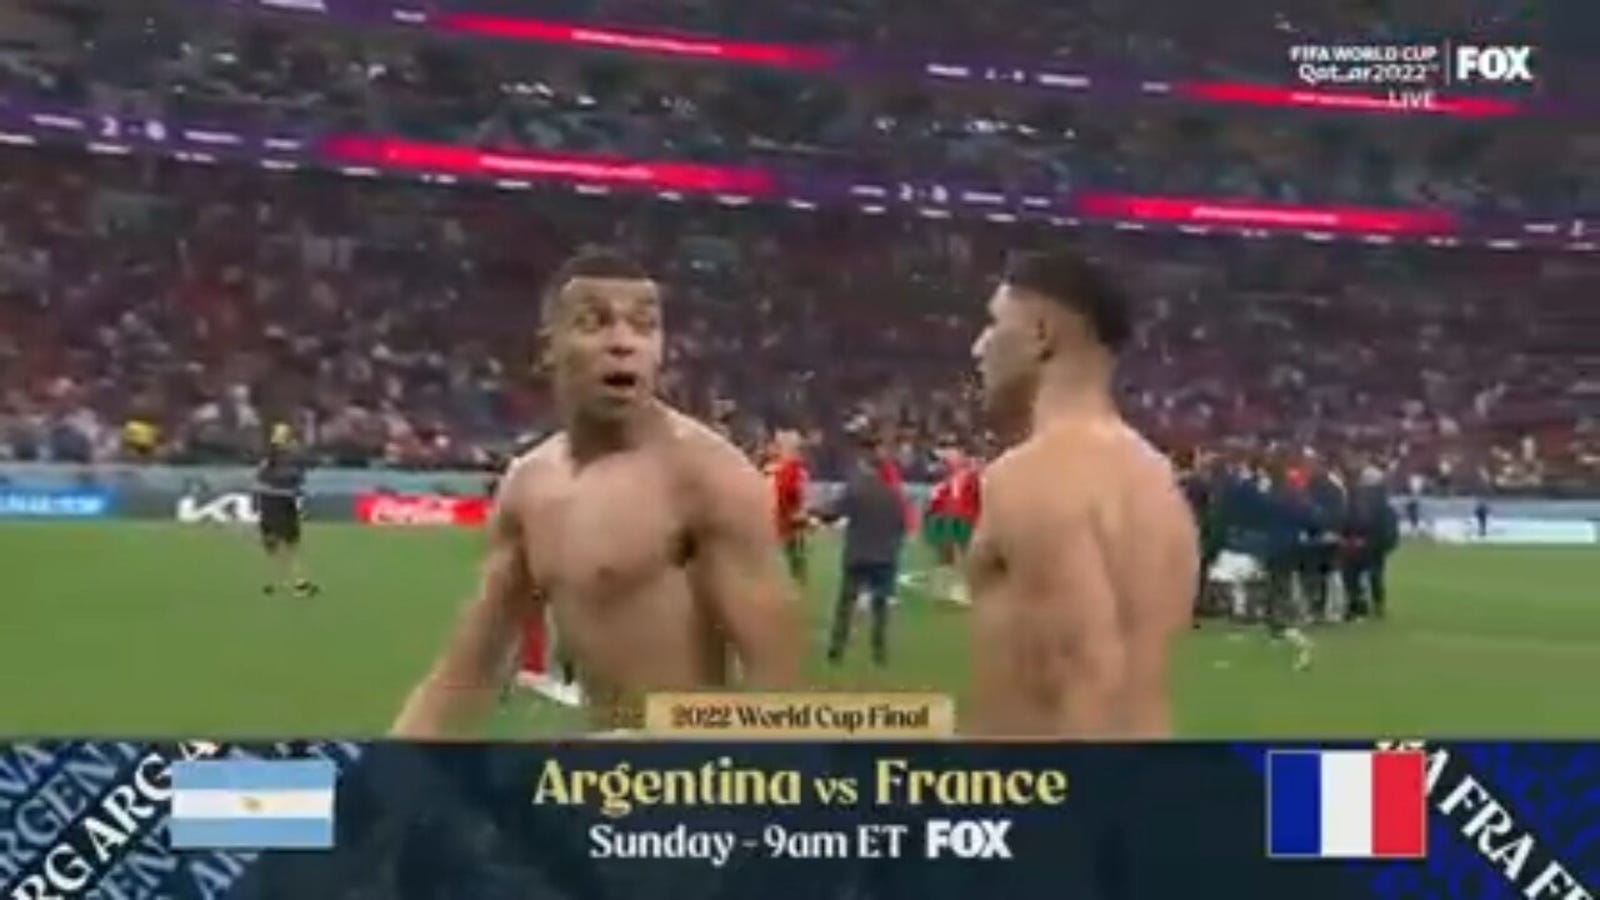 Kylian Mbappé and France celebrate after advancing to 2022 FIFA World Cup final